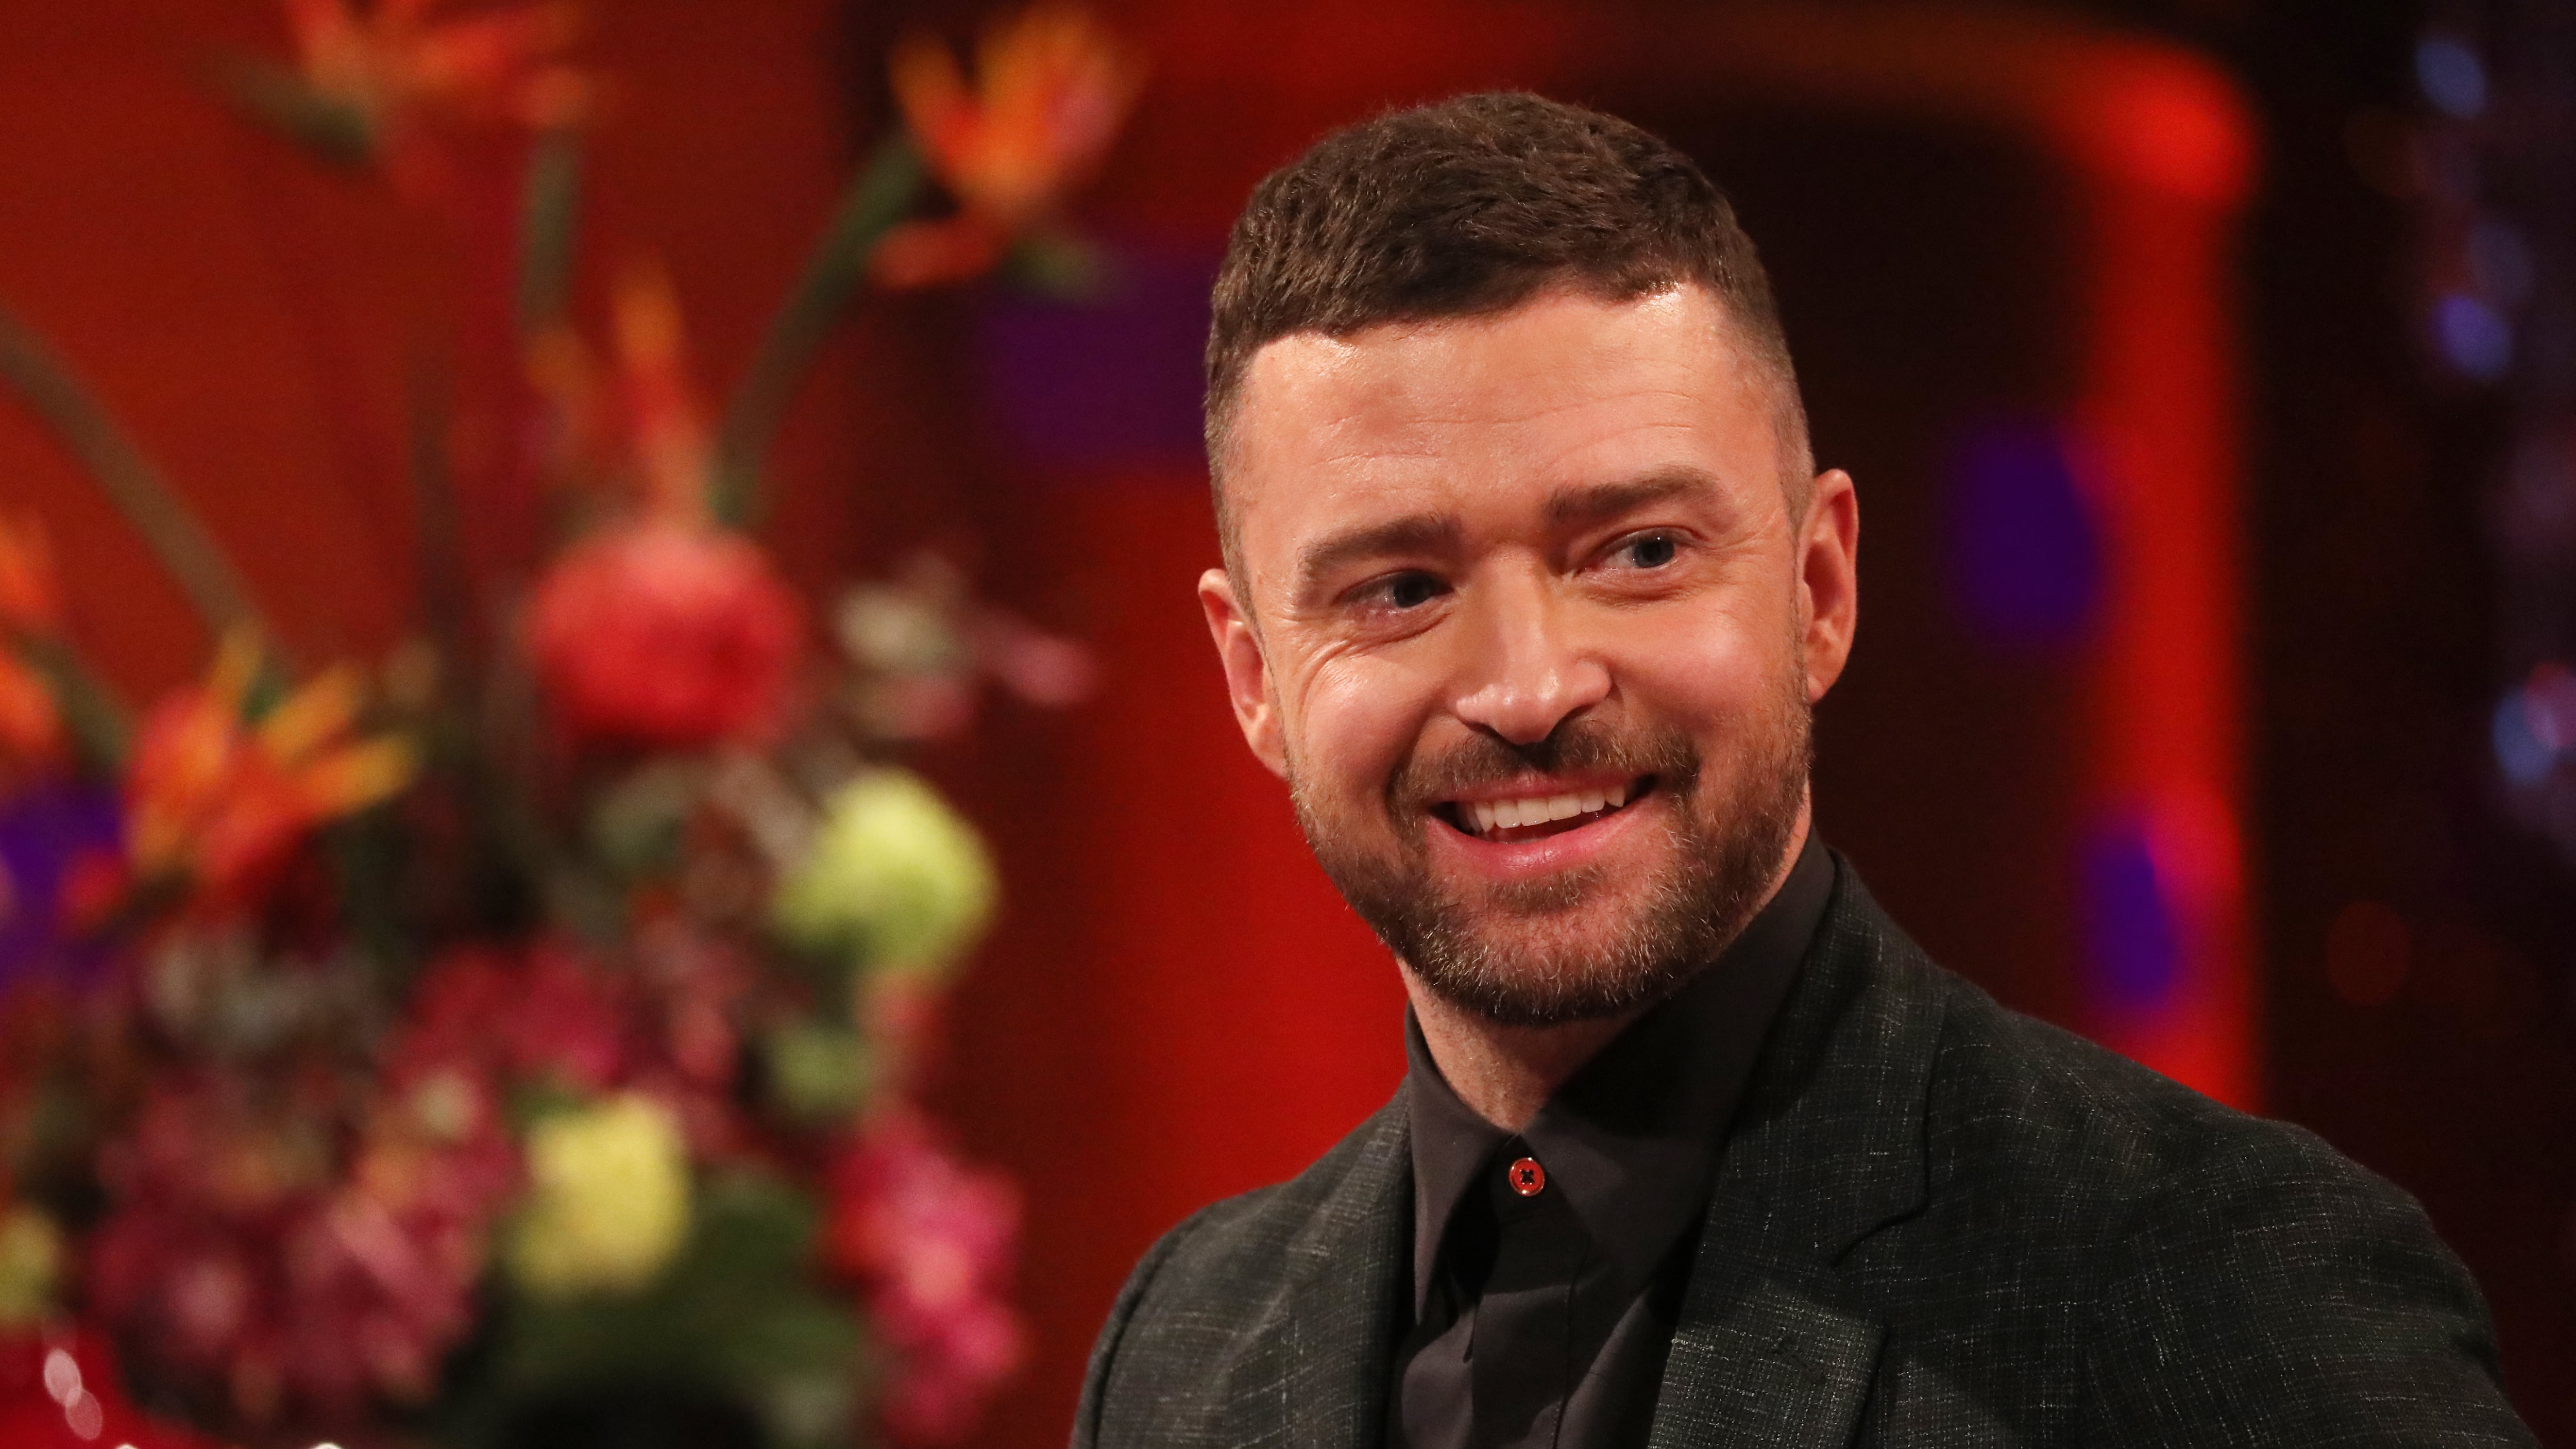 Justin Timberlake was arrested in The Hamptons